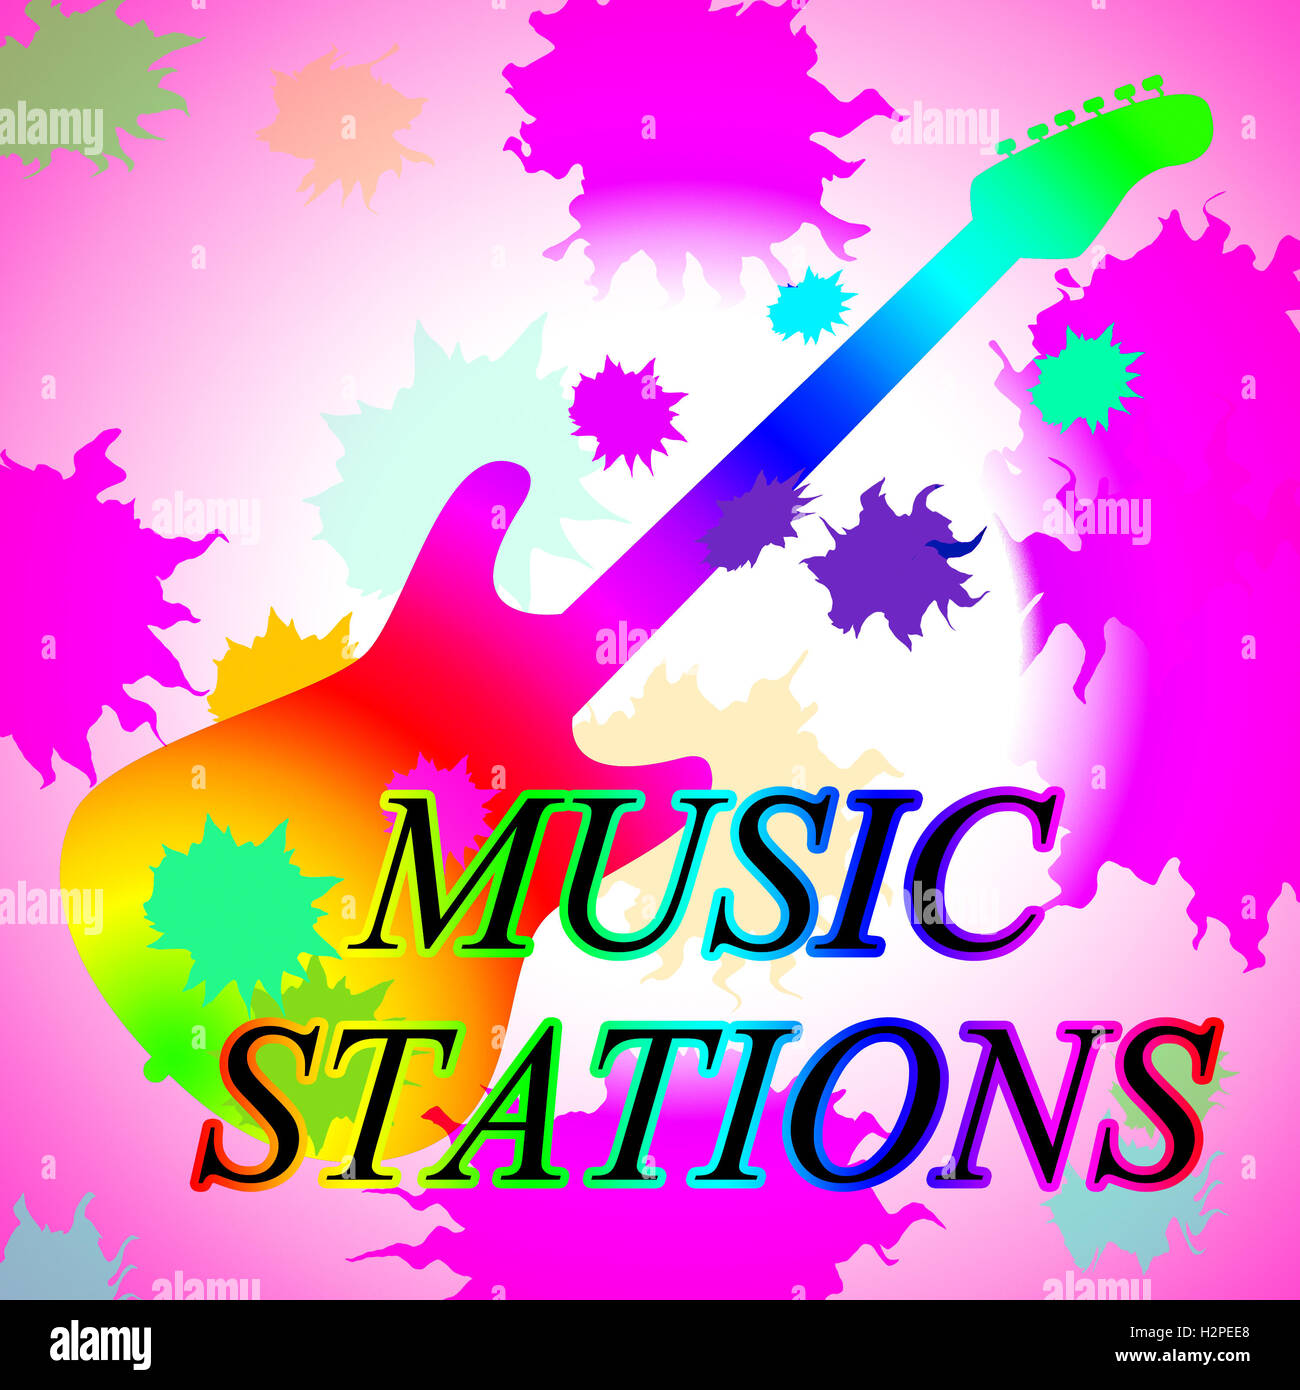 Music Stations Indicating Transmission Broadcast And Acoustic Stock Photo